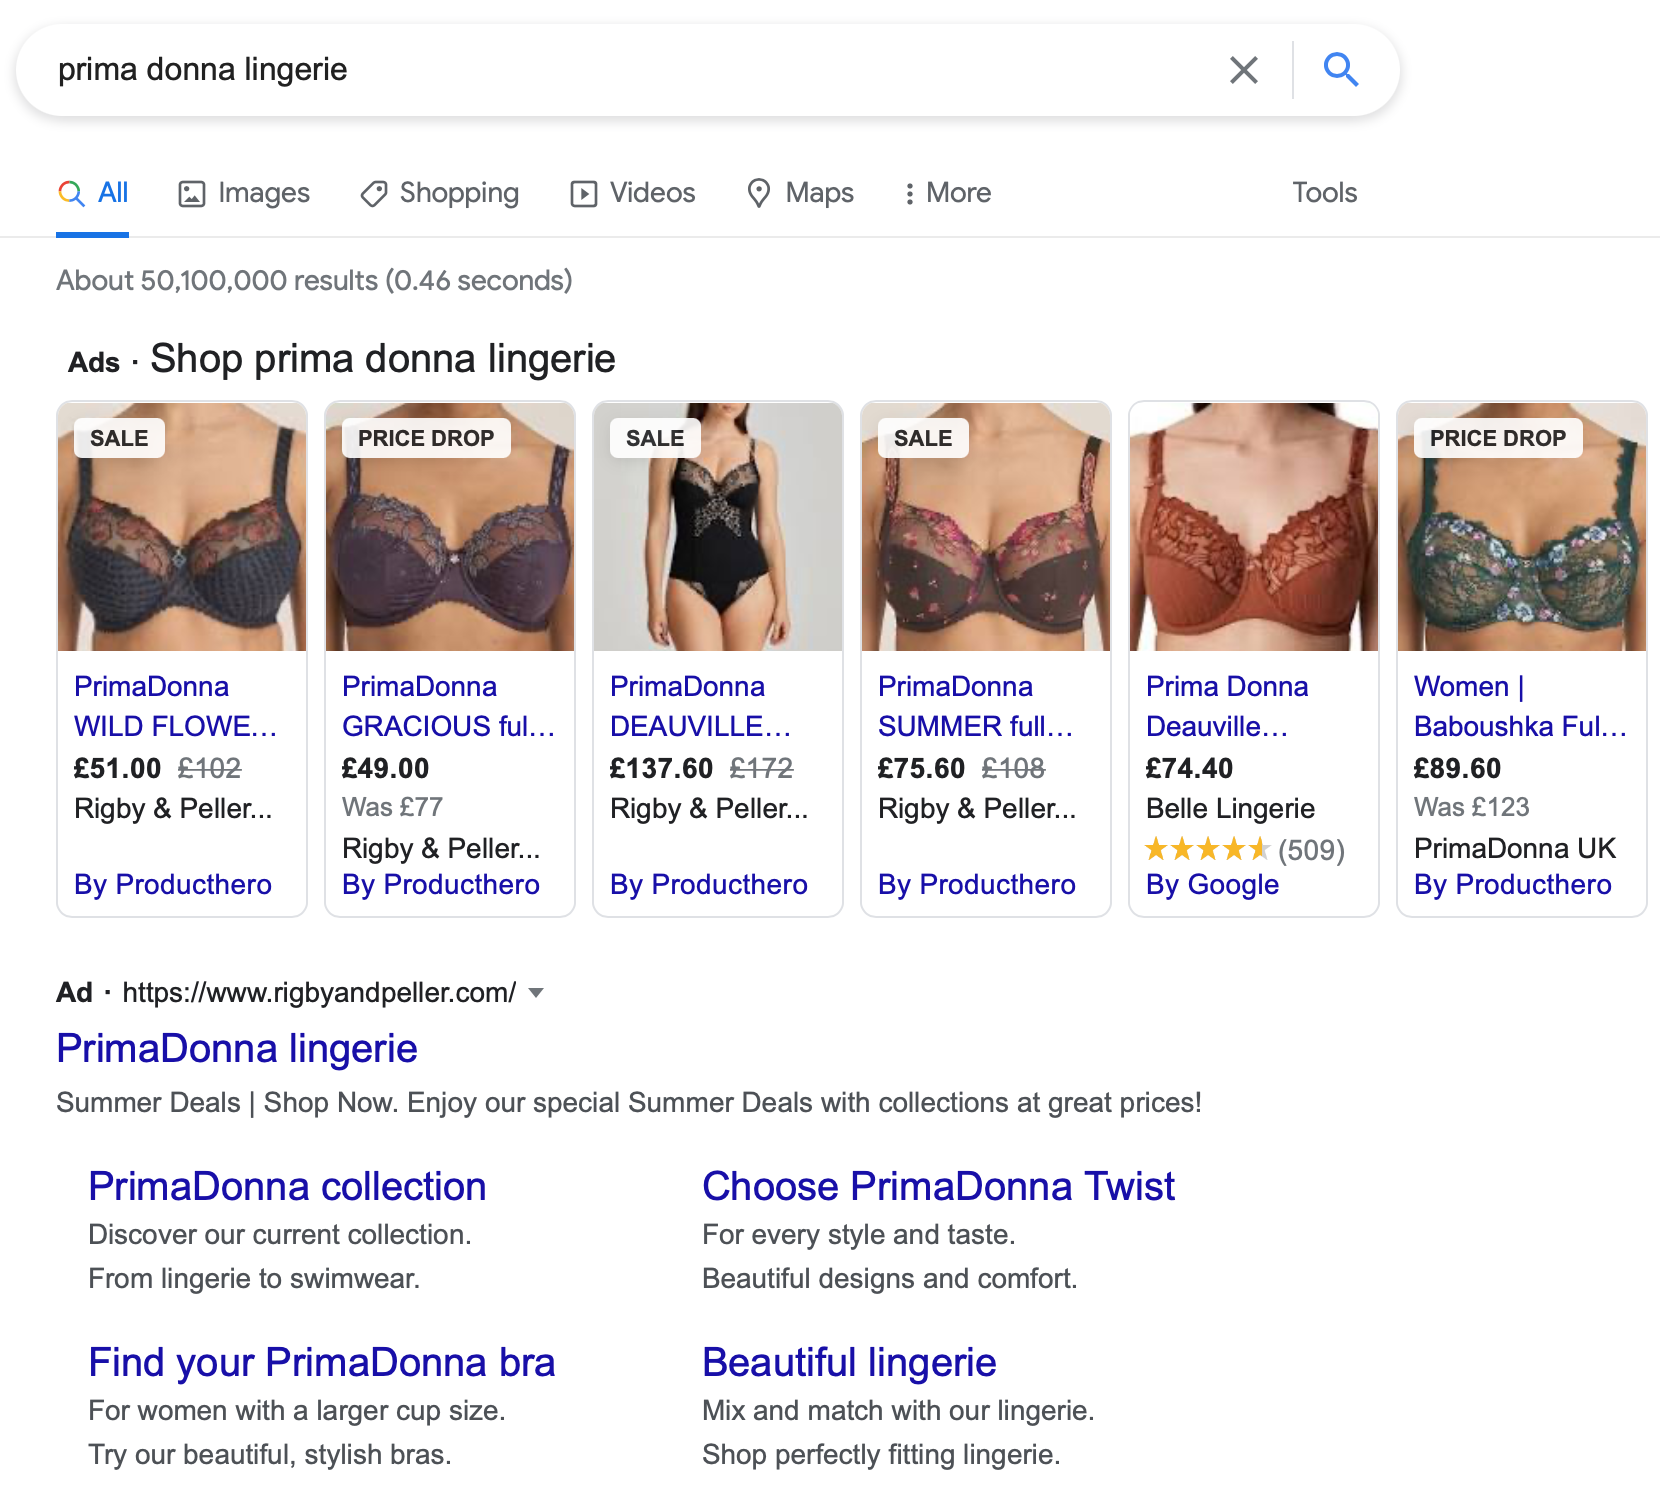 Selling lingerie via Google Search: an analysis by Be Found Be Chosen